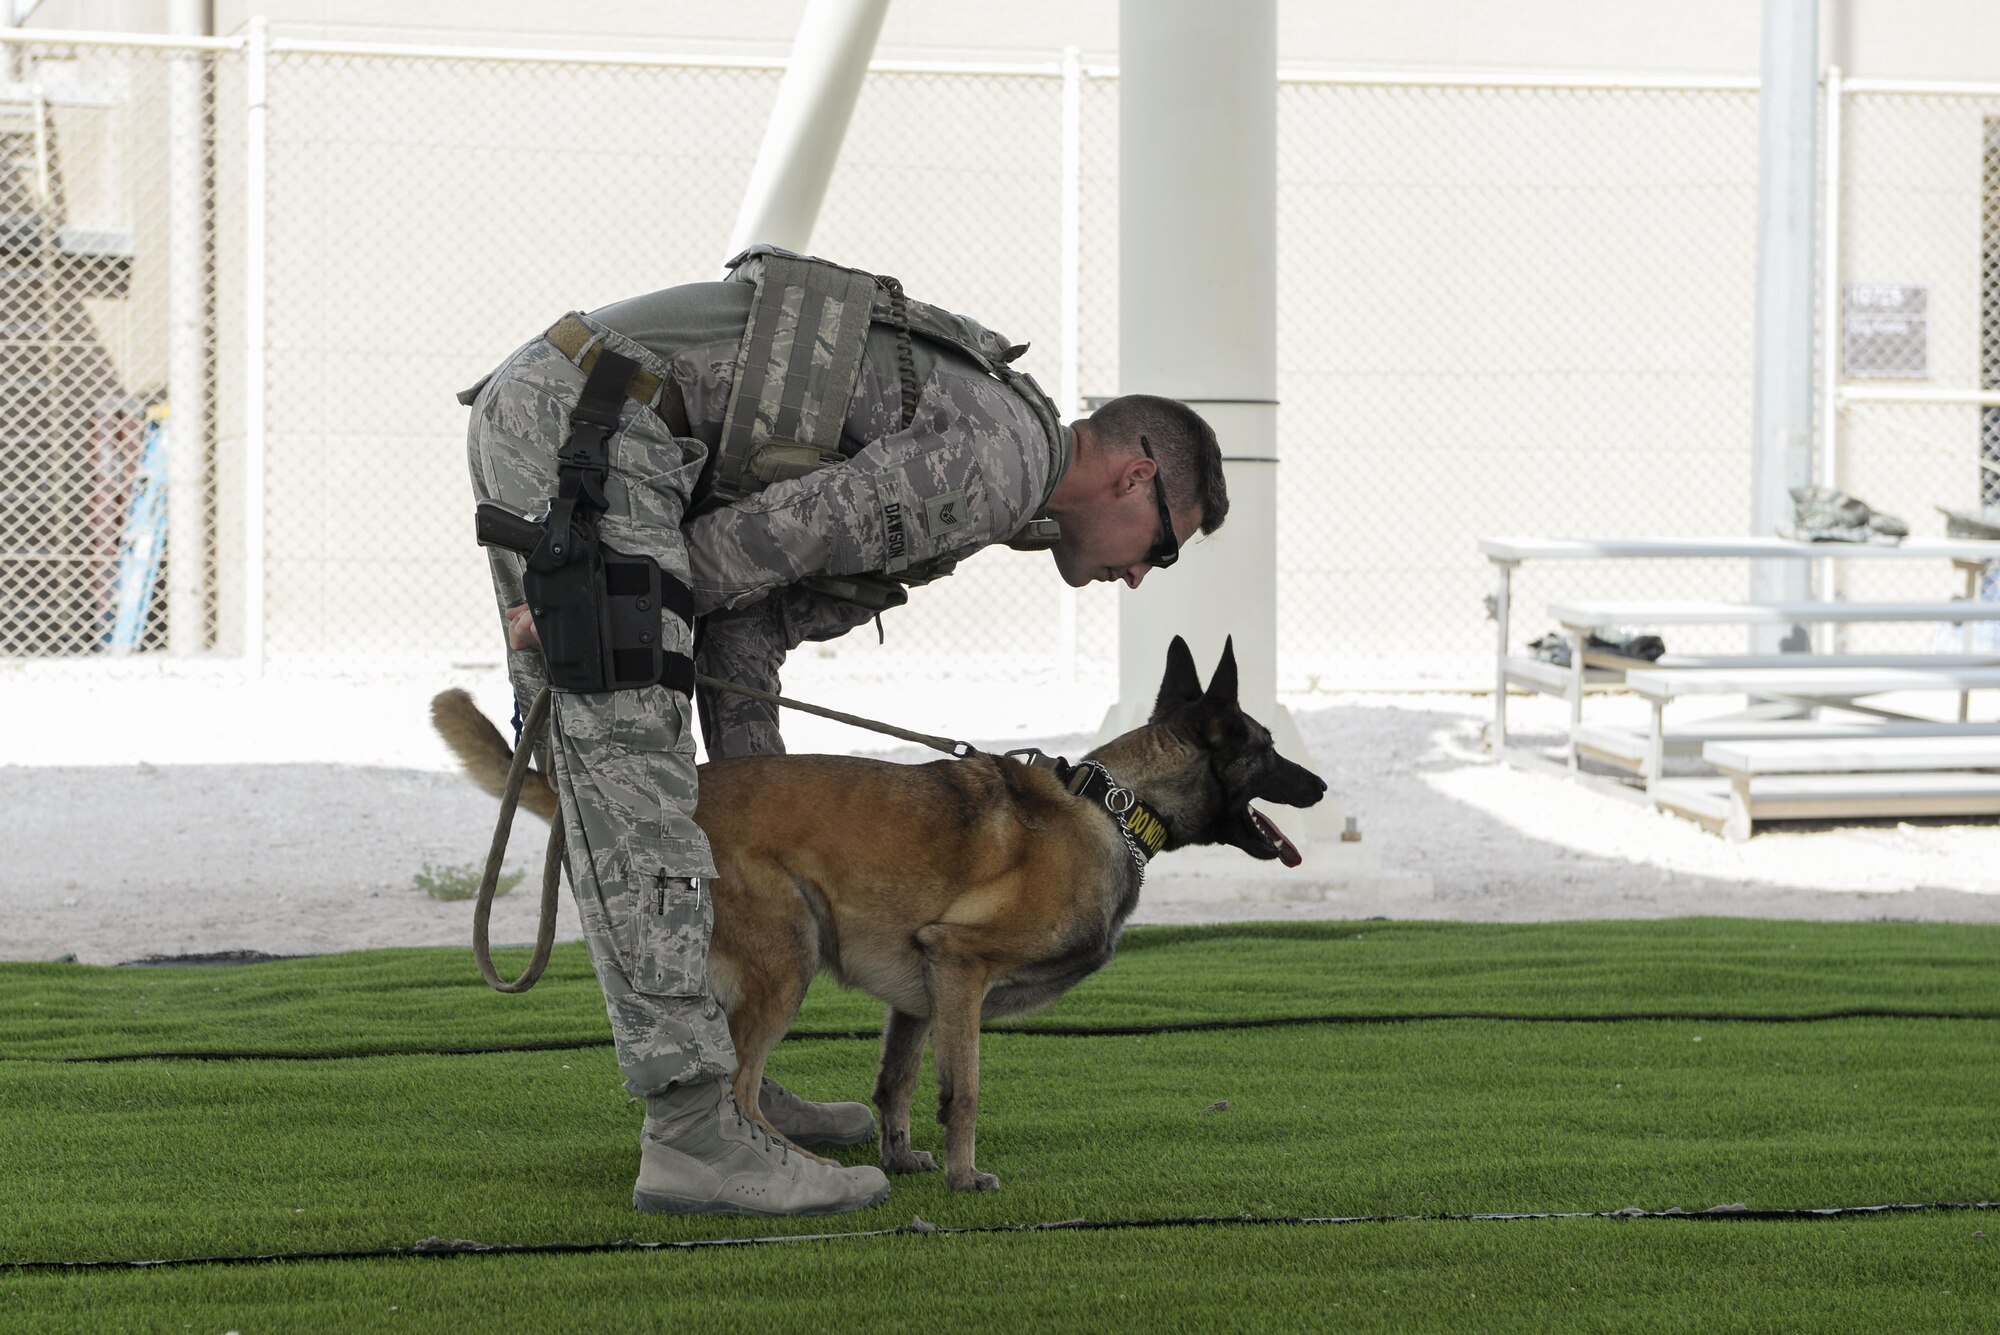 U.S. Air Force Staff Sgt. Timothy Dawson, military working dog handler assigned to the 379th Expeditionary Security Forces Squadron, prepares to release his military working dog,Mmaura, on a “suspect” during a K-9 demonstration exercise at Al Udeid Air Base, Qatar, Aug. 17, 2017